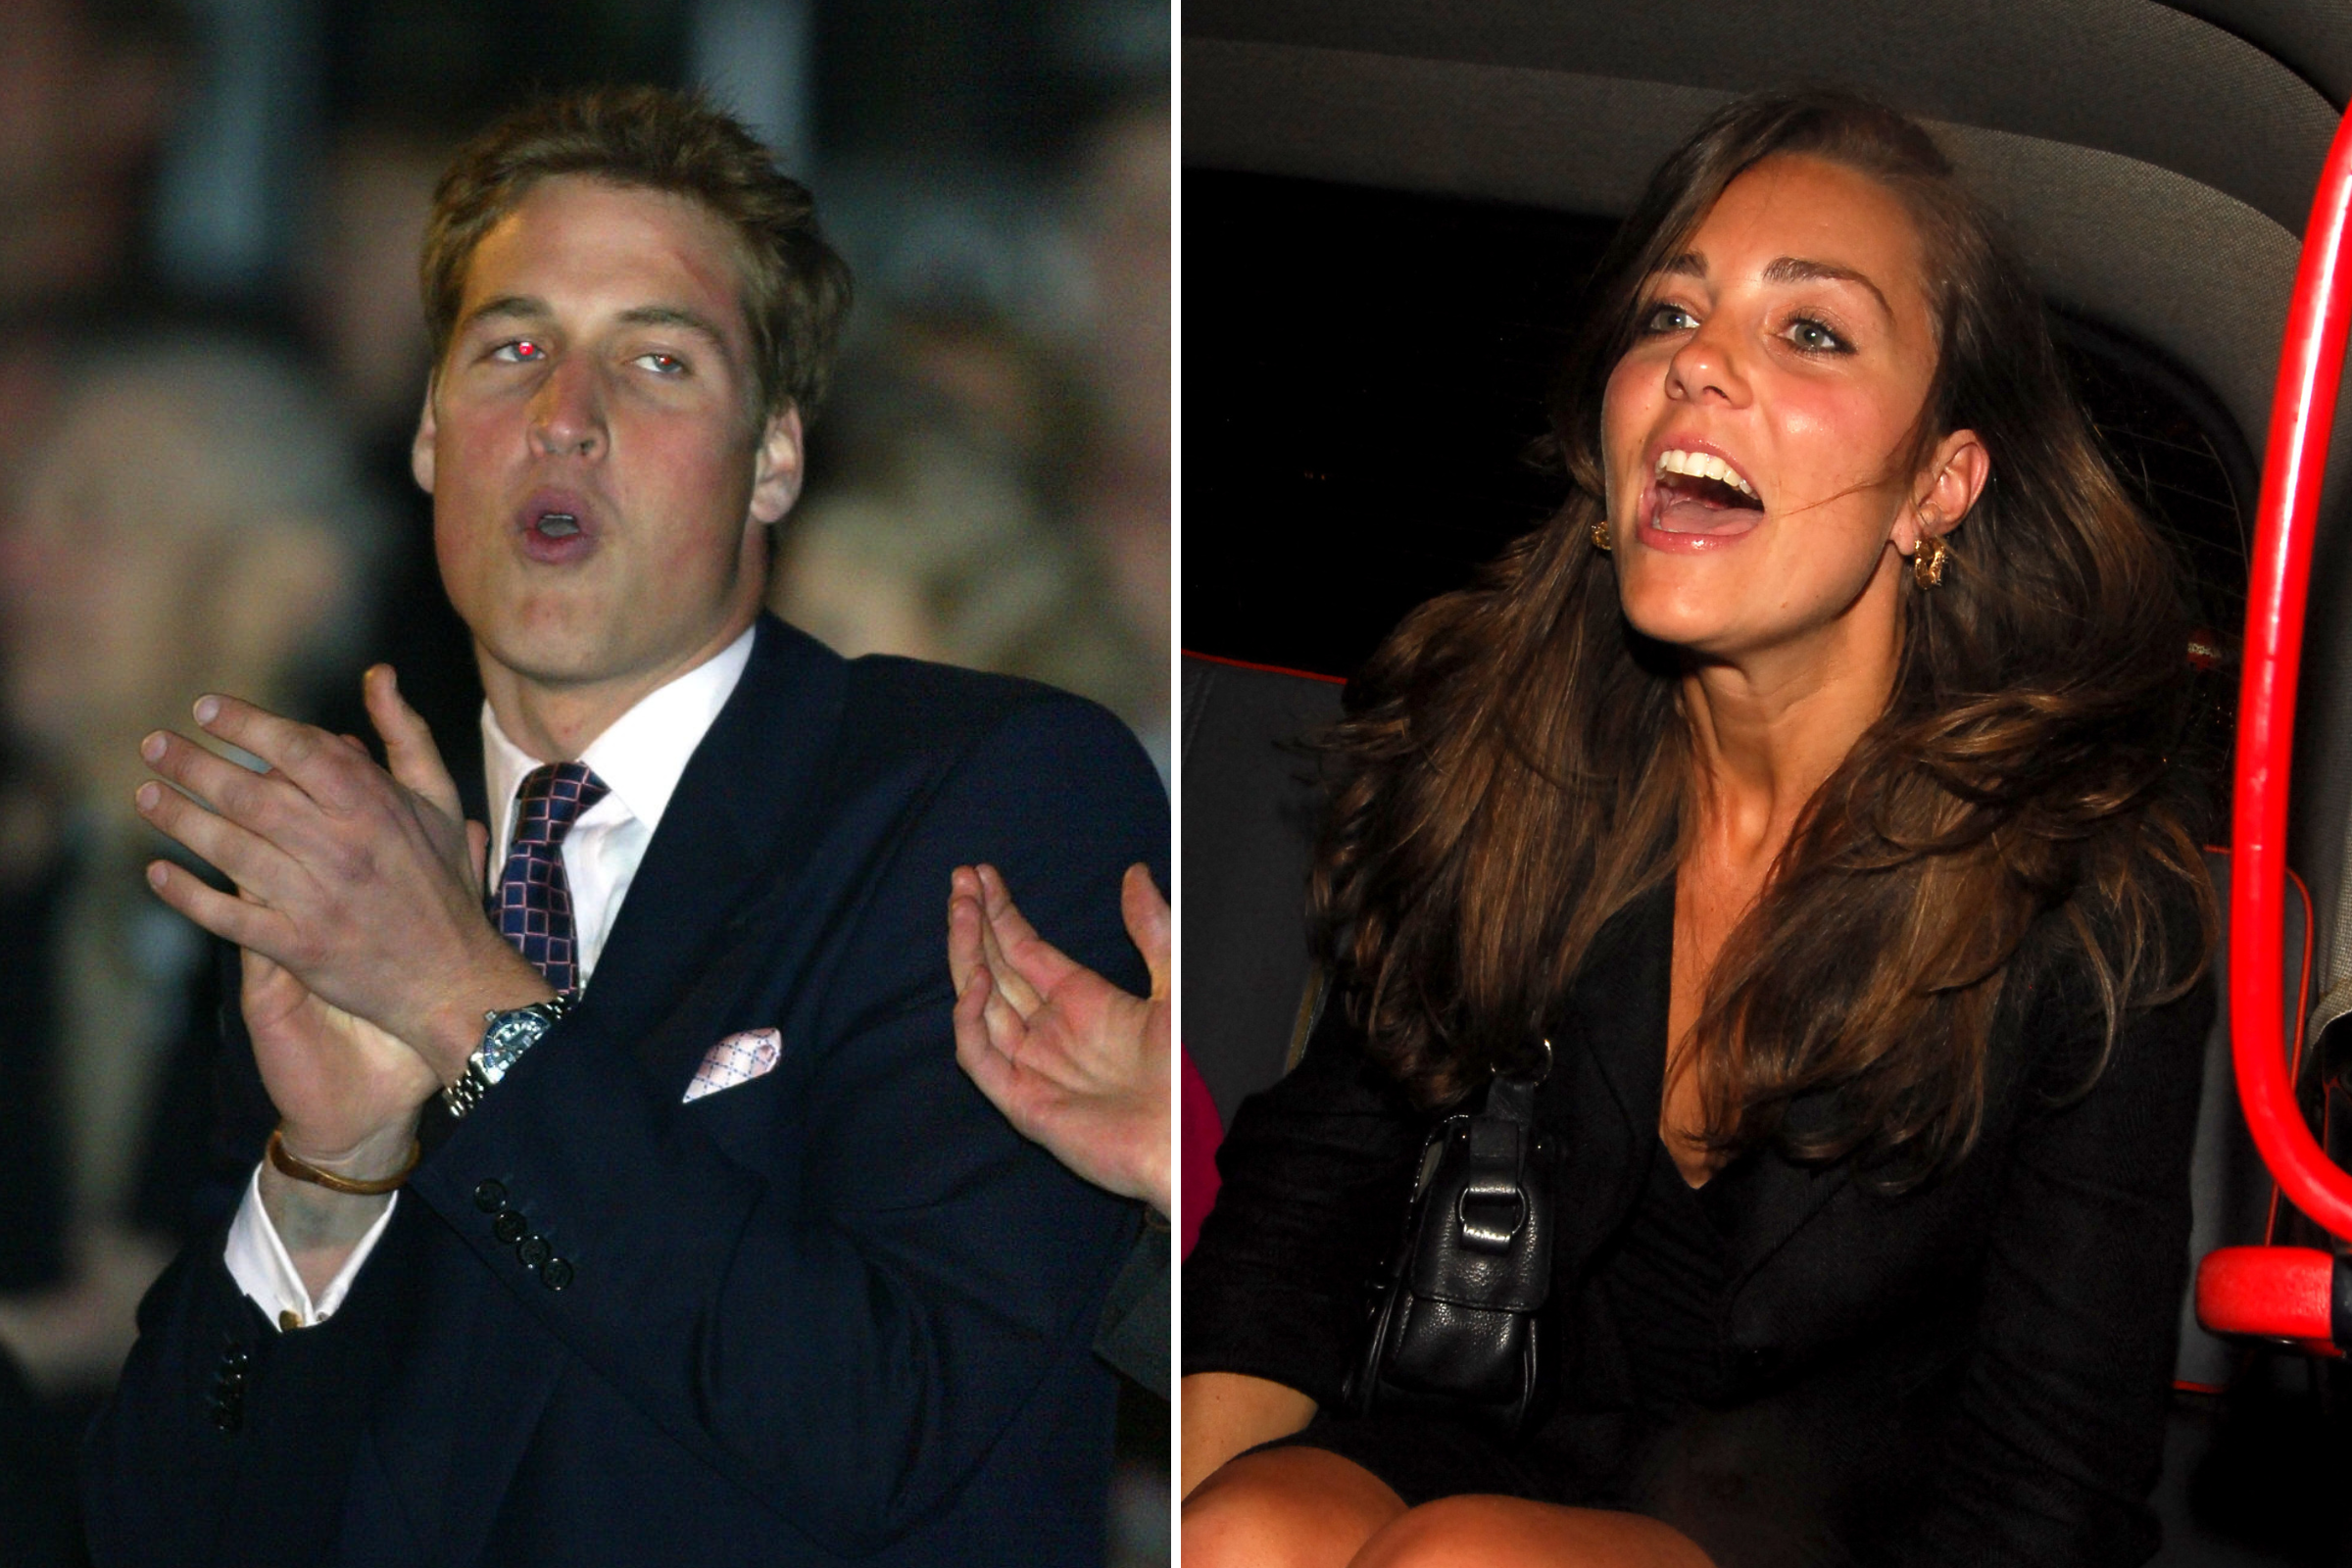 grube Klinik overskud Clip of William, Kate 'Partying Like Normal Young People' Goes Viral